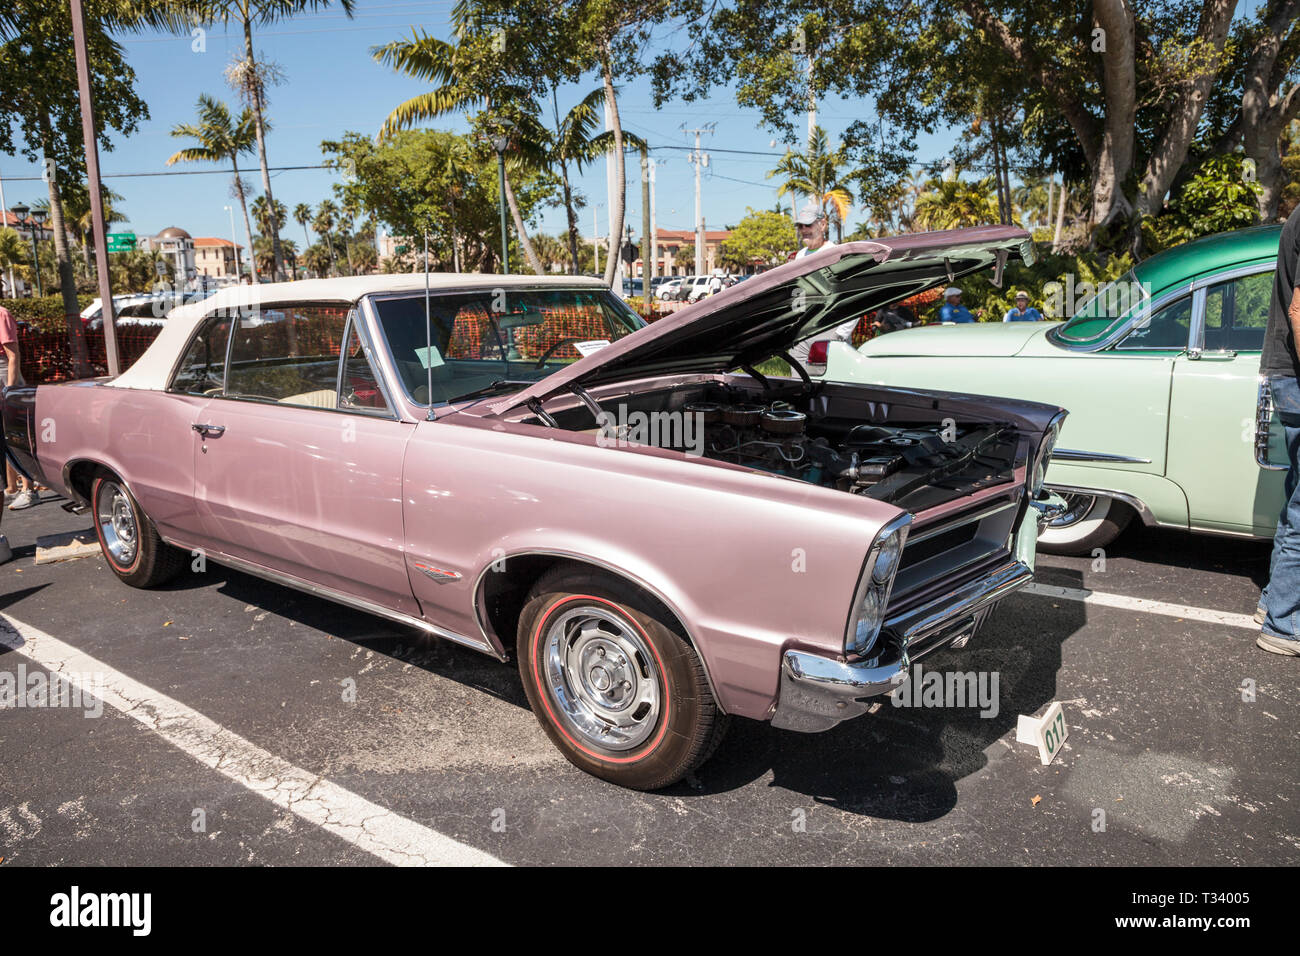 Naples, Florida, USA – March 23, 2019: Pink 1965 Pontiac GTO at the 32nd Annual Naples Depot Classic Car Show in Naples, Florida. Editorial only. Stock Photo